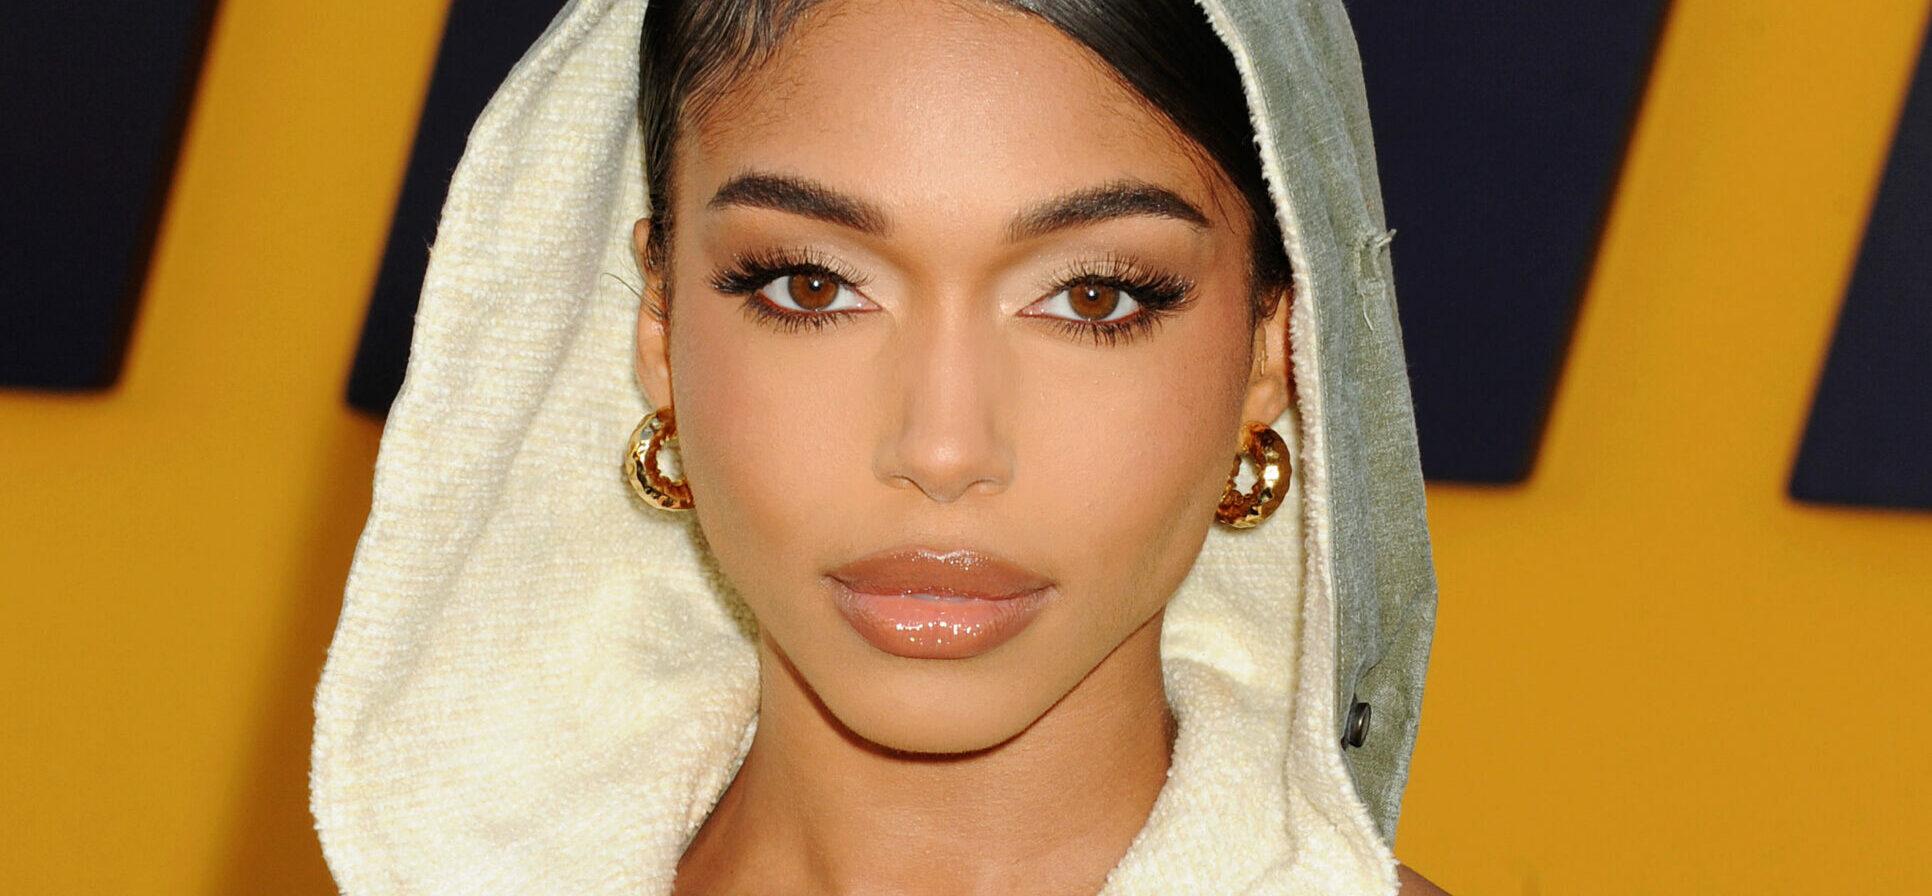 Lori Harvey Shows Off Her Ripped Abs In New Steamy Beach Pics